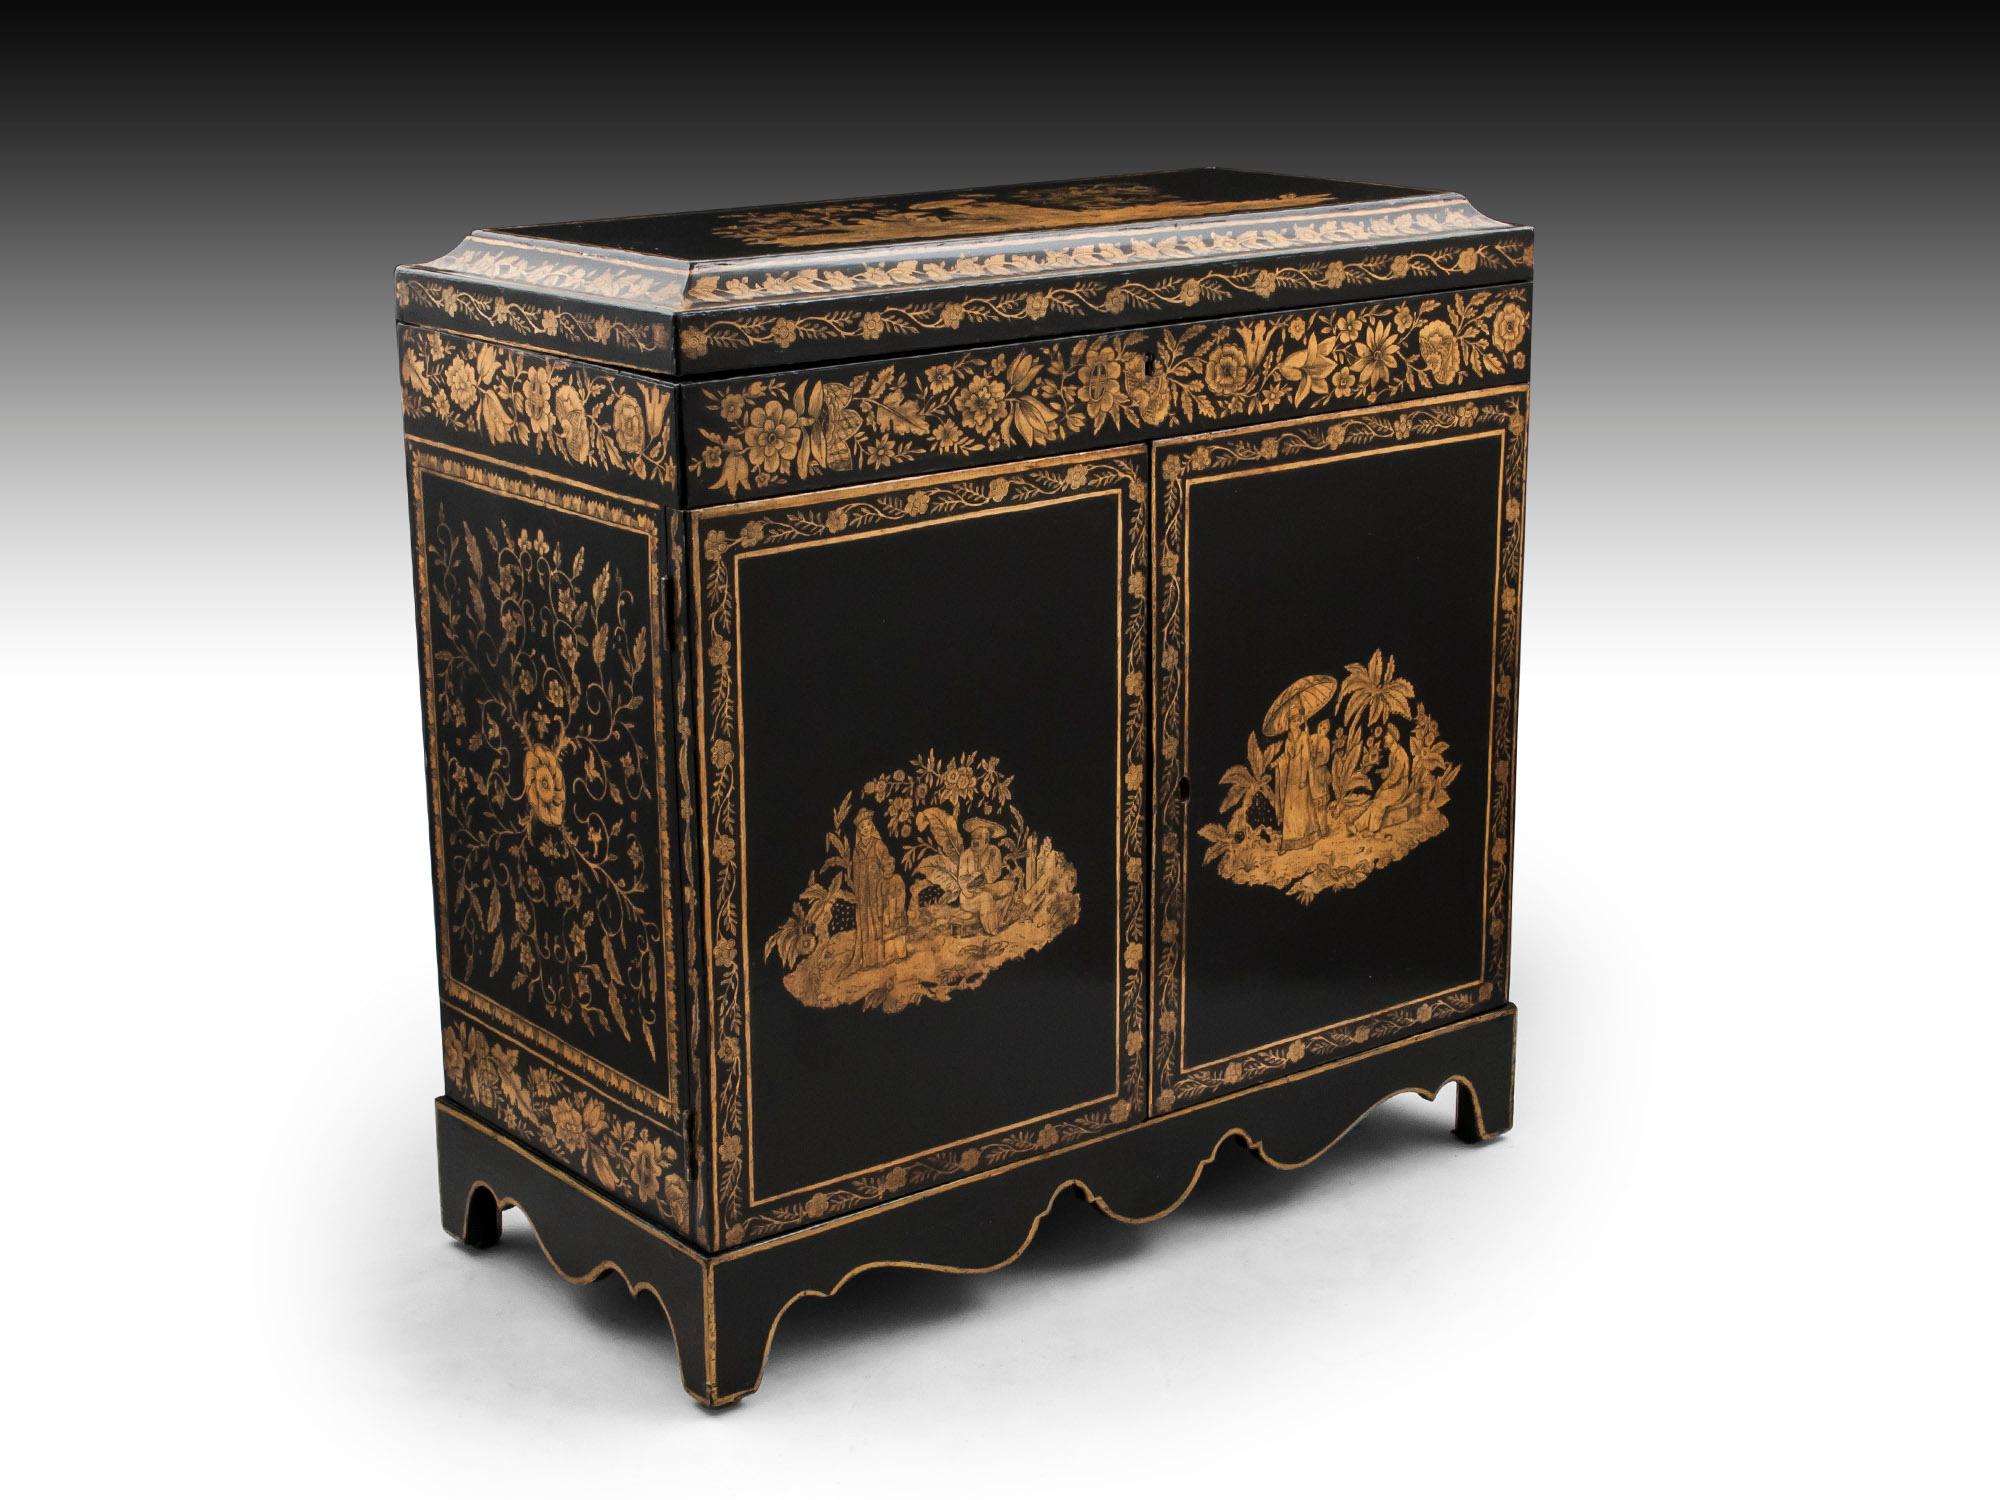 Chinoiserie Penwork Grand Tour Treasure Cabinet Early 19th Century In Good Condition For Sale In Northampton, United Kingdom